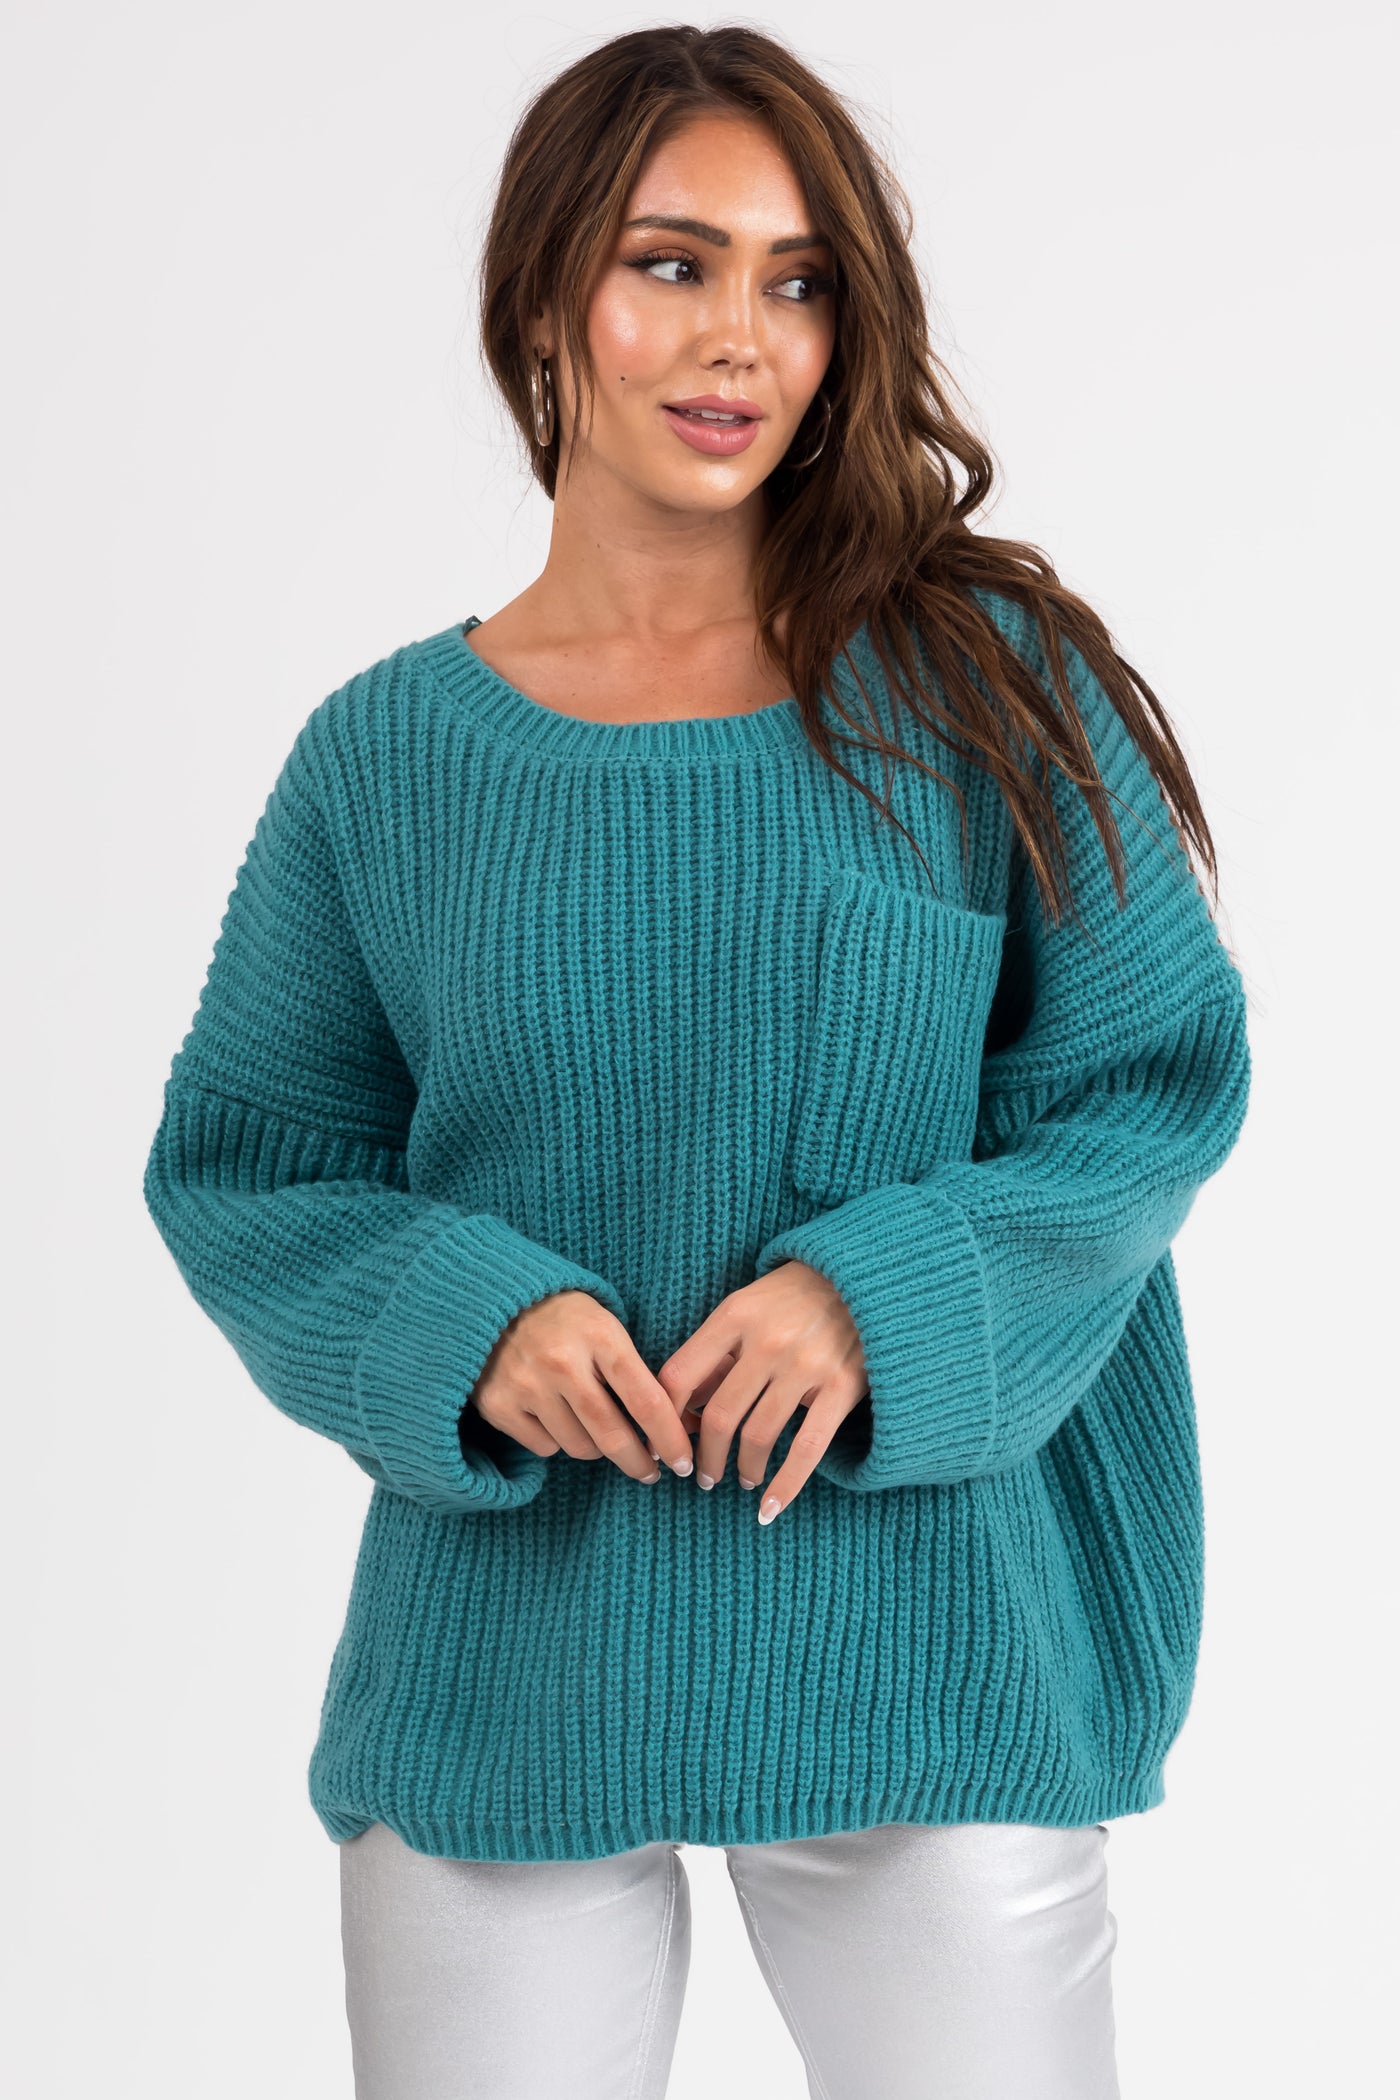 Teal Oversized Chest Pocket Cozy Sweater